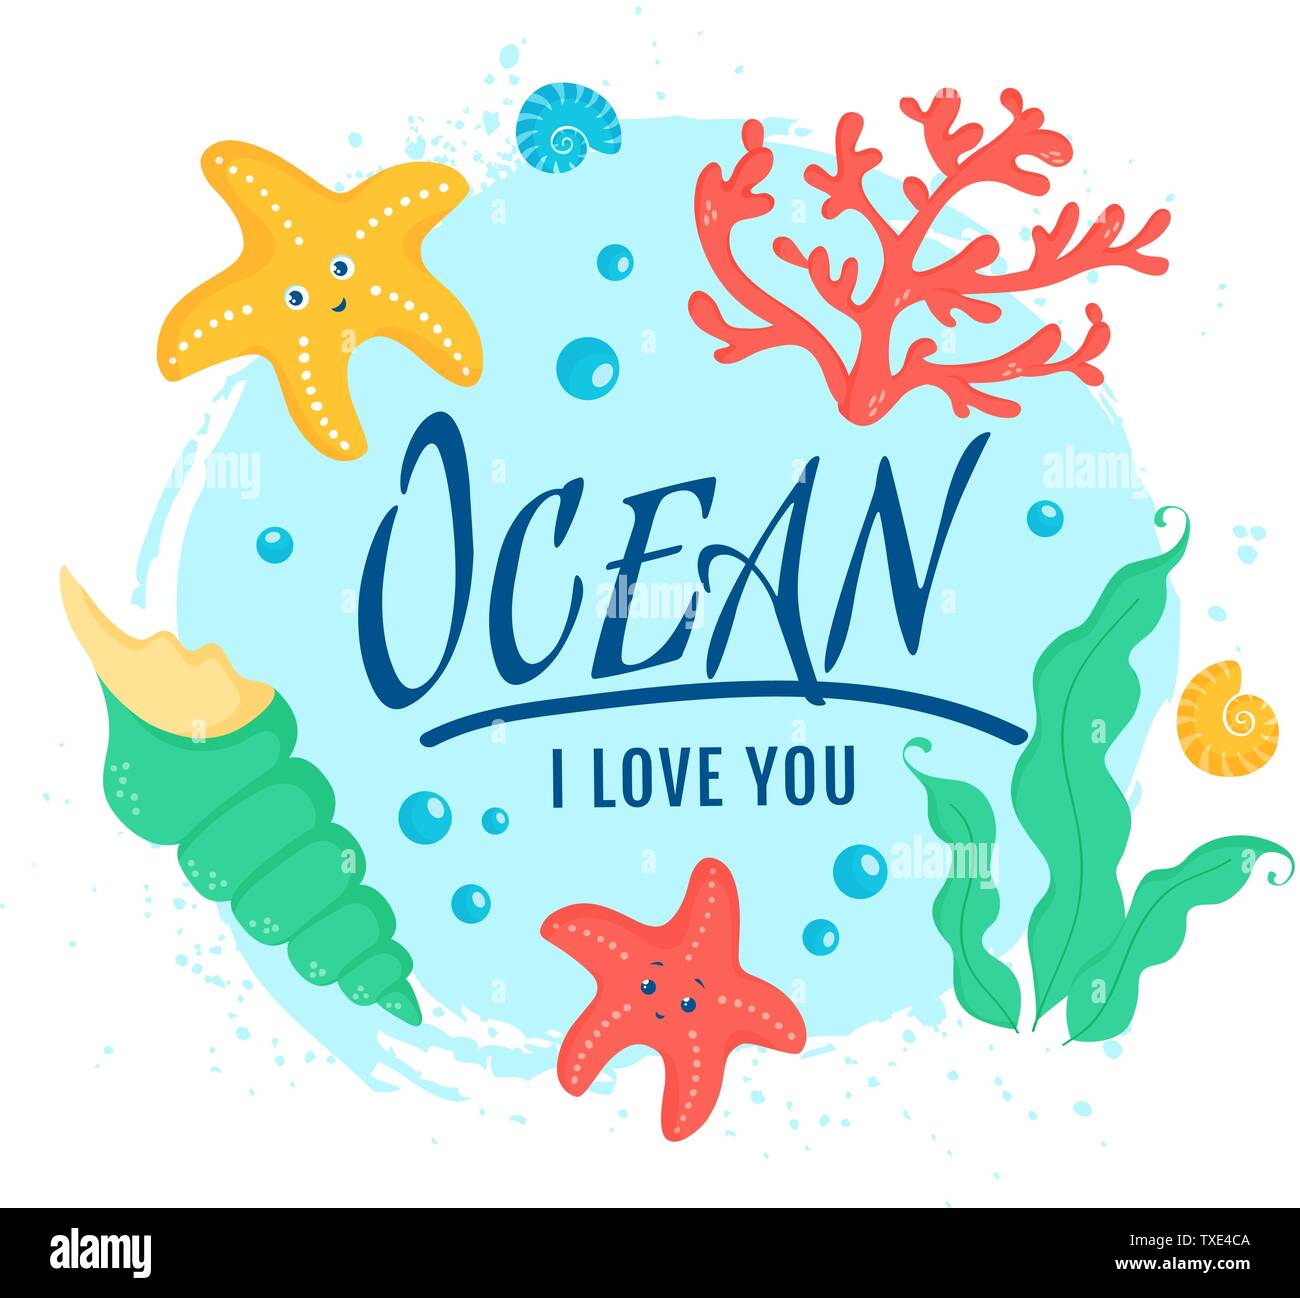 Ocean I love you. Banner with cute sea animals and plants - starfishes, shells, coral and seaweeds. Vector illustration for poster, card, kids apparel Stock Vector